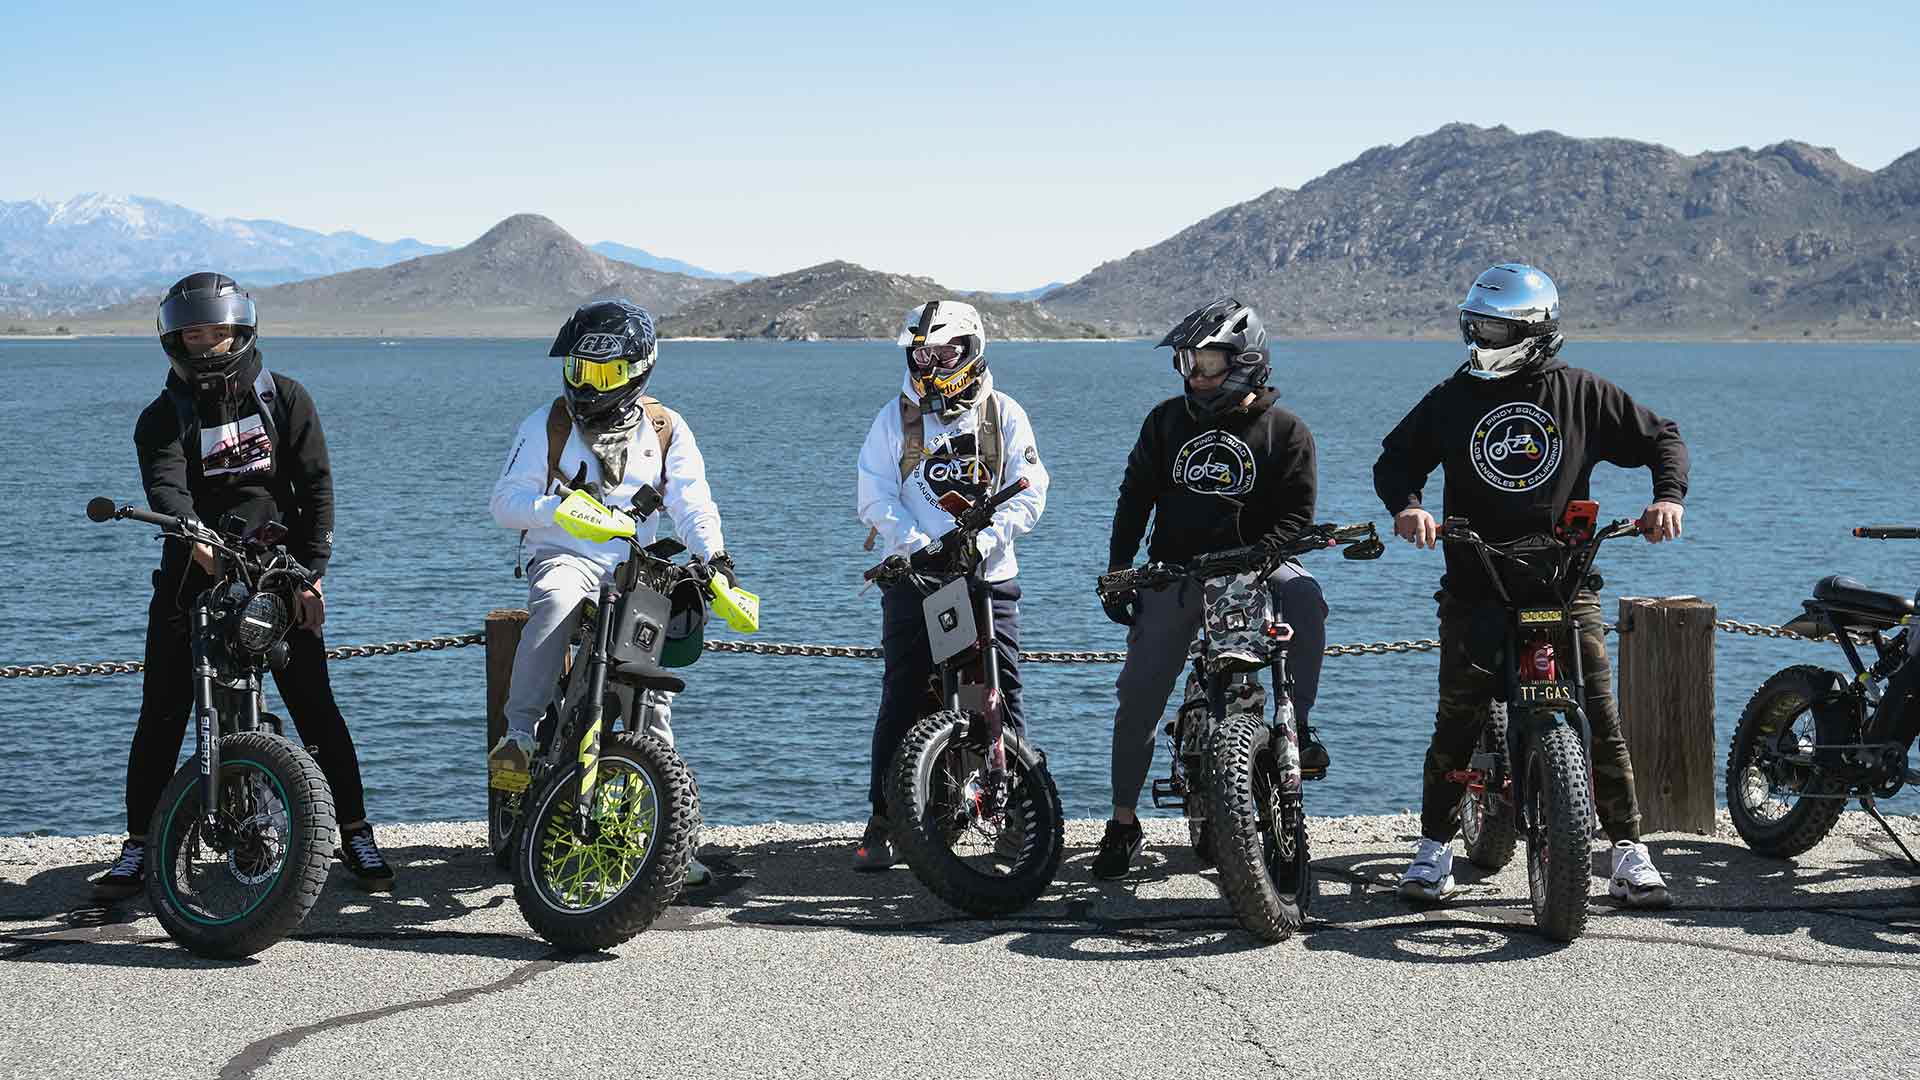 A row of Super73 ebike riders in helmets posing on their bikes in front of a lake